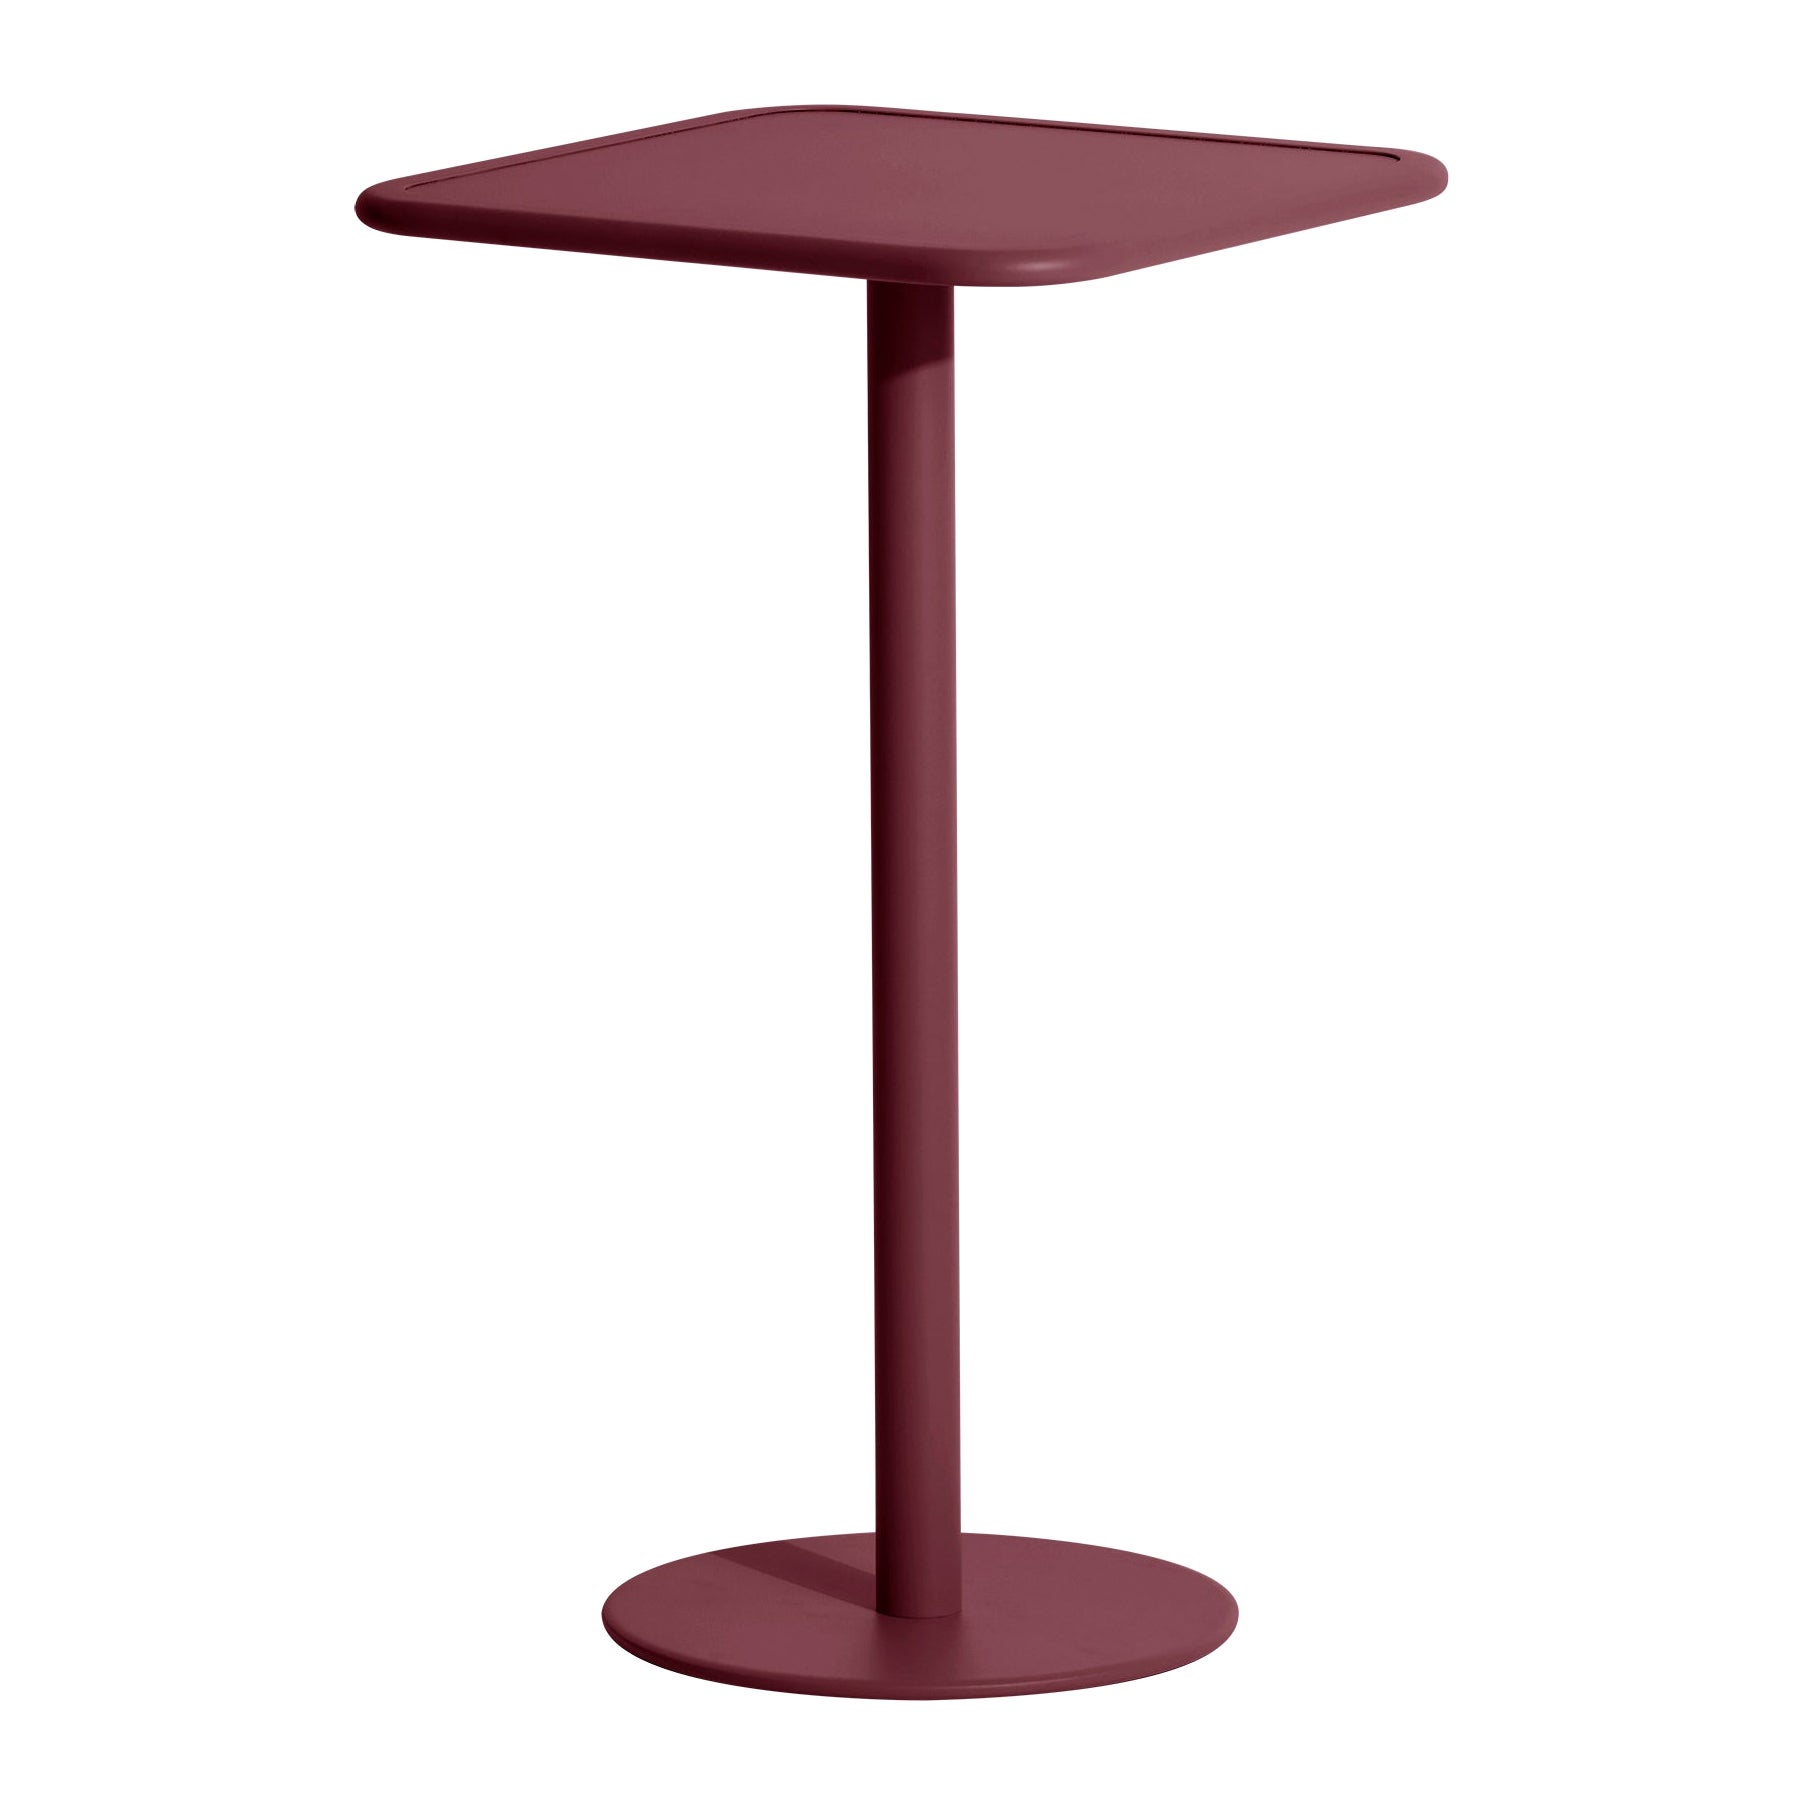 Petite Friture Week-End Square High Table in Burgundy Aluminium, 2017 For Sale